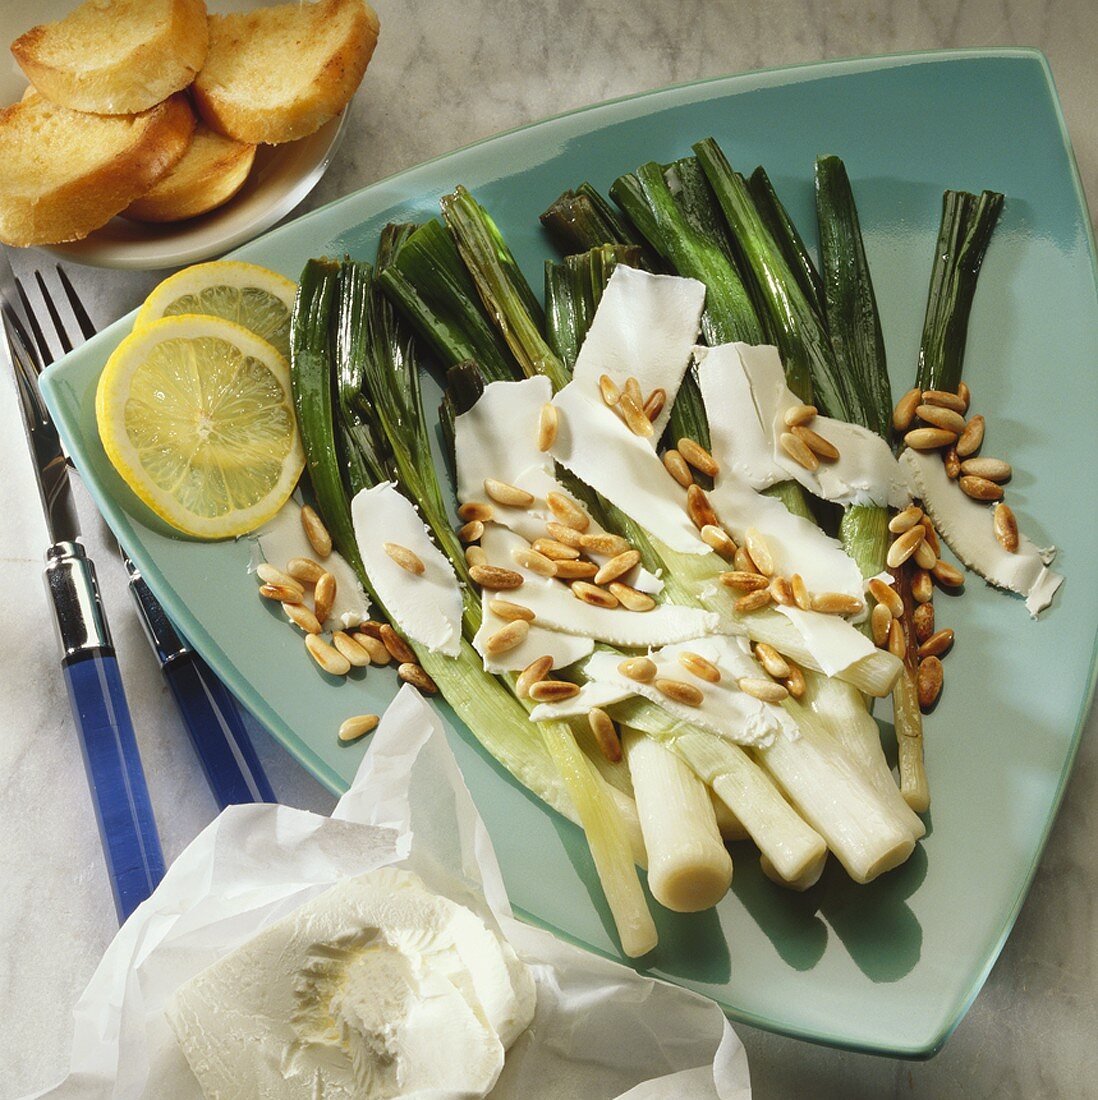 Steamed leeks with sheep's cheese and pine nuts